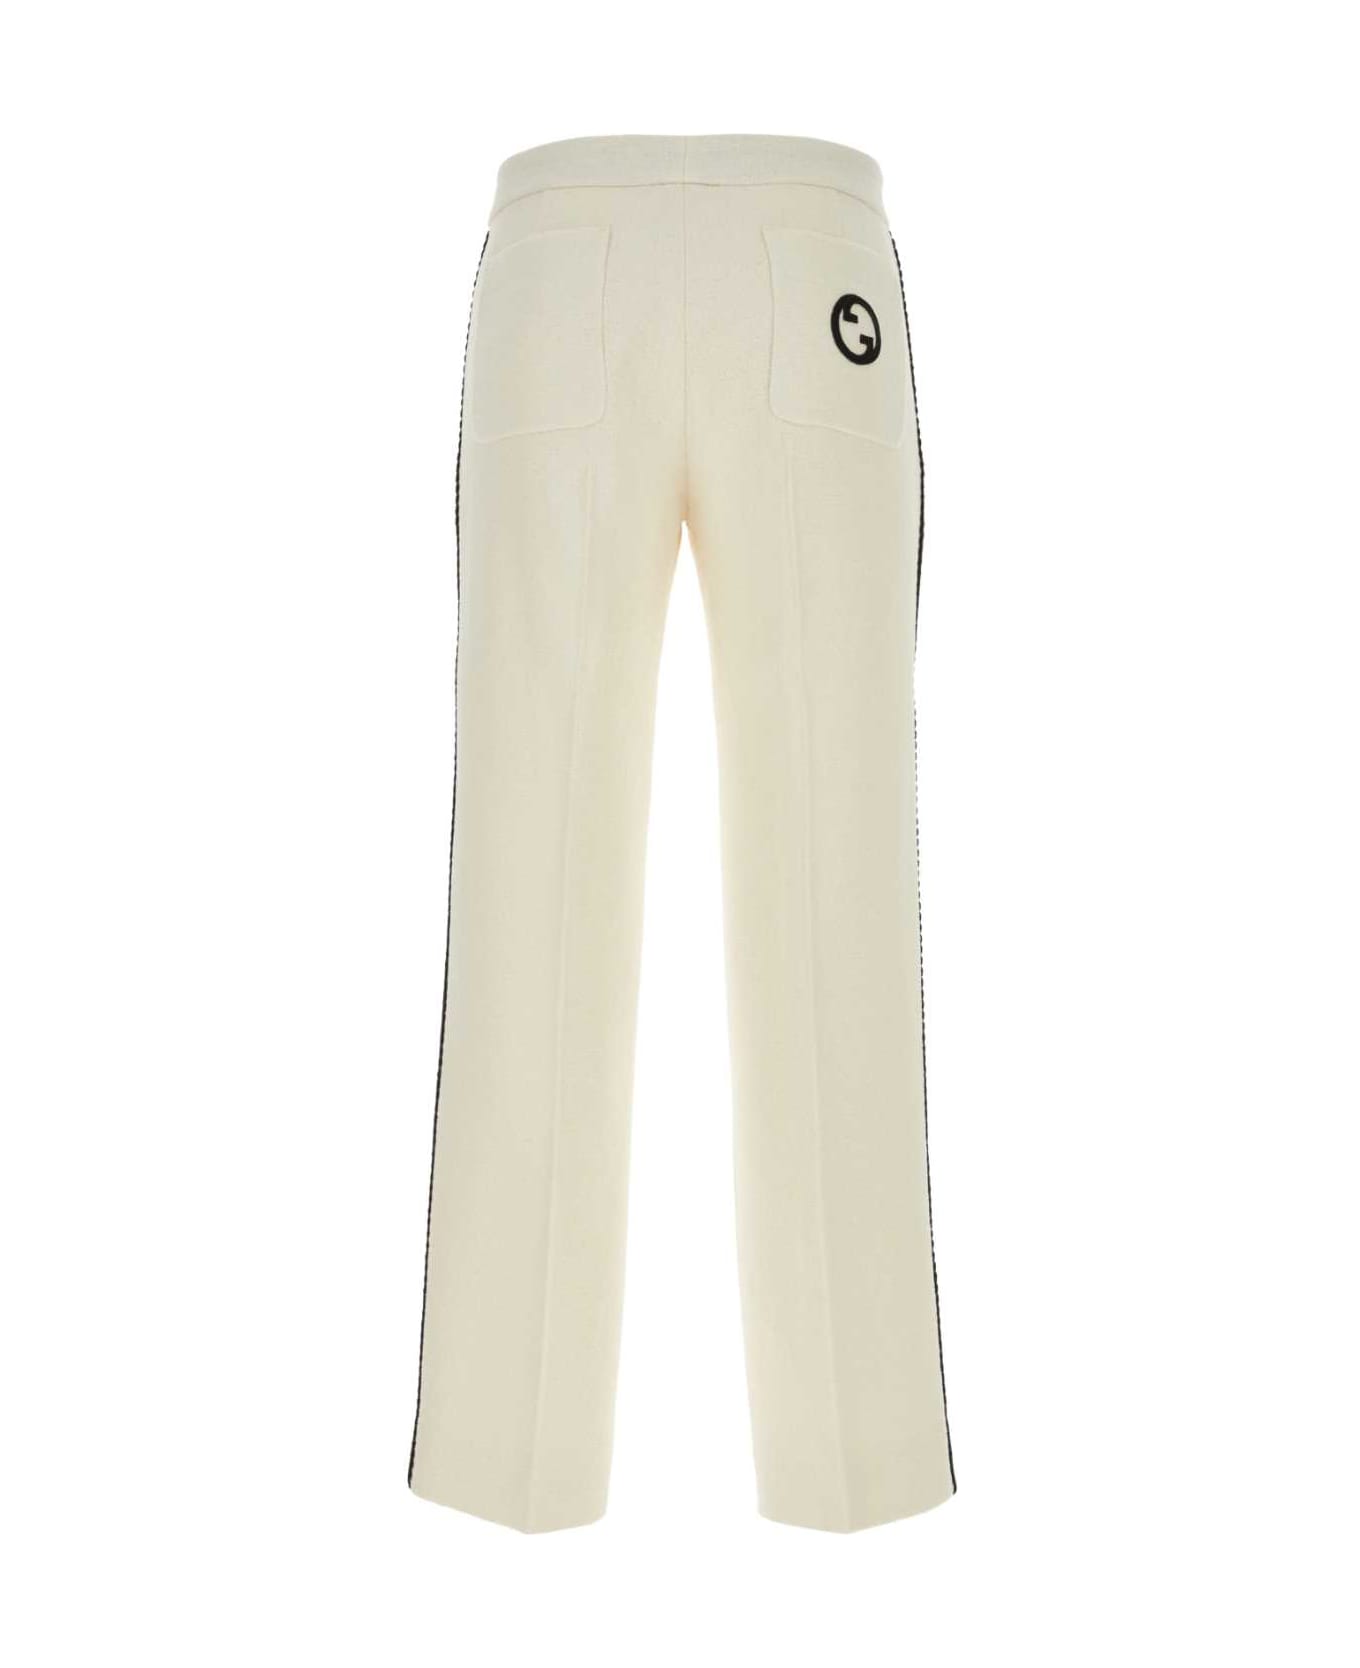 Gucci Ivory Tweed Pant - ALMOND FLOWER/MIX